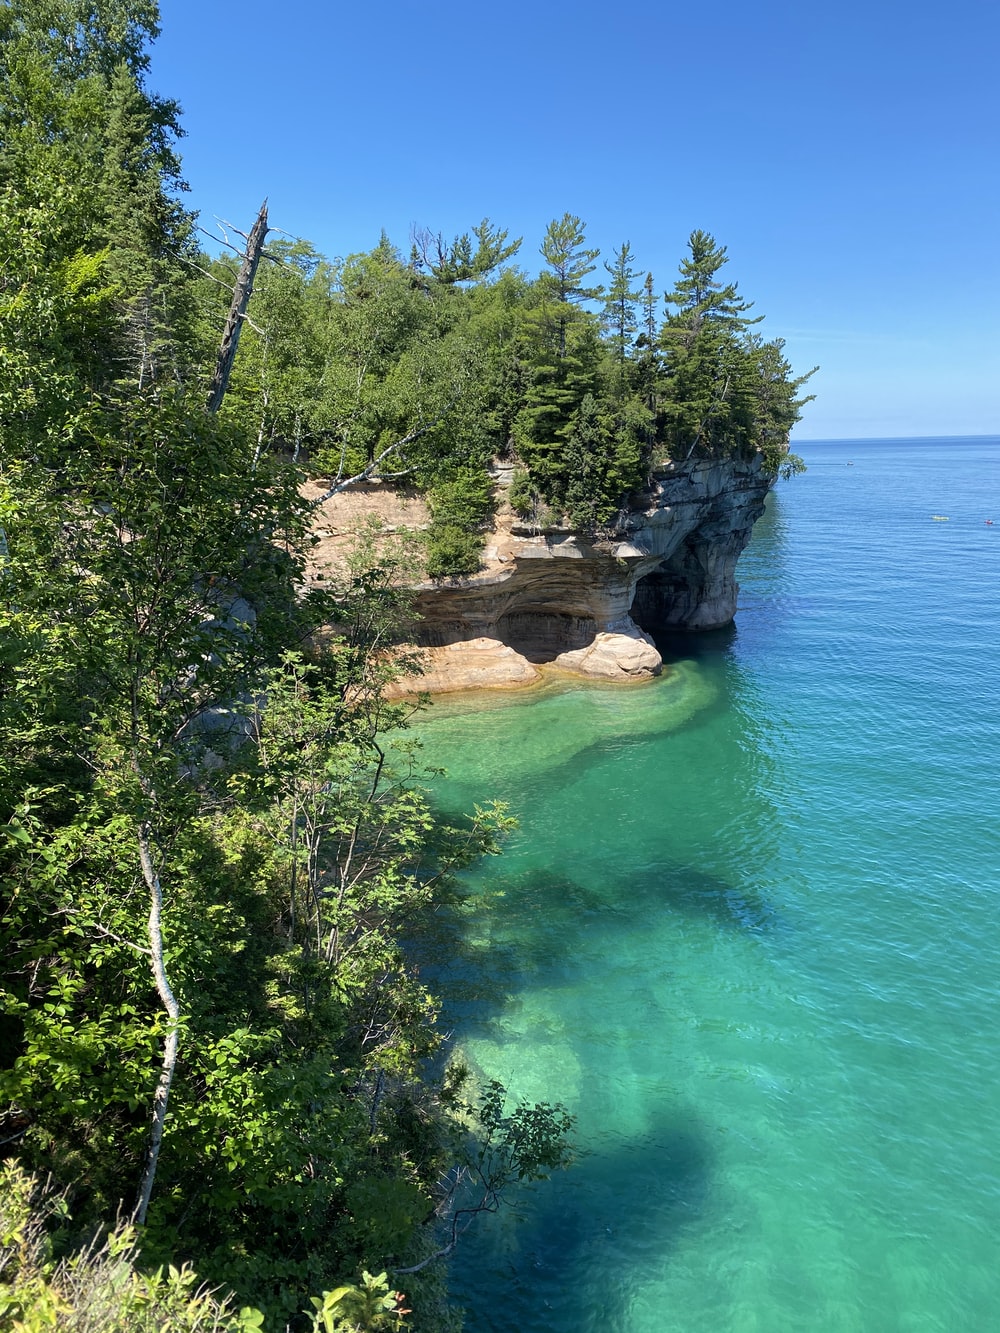 Pictured Rocks National Lakeshore Picture. Download Free Image